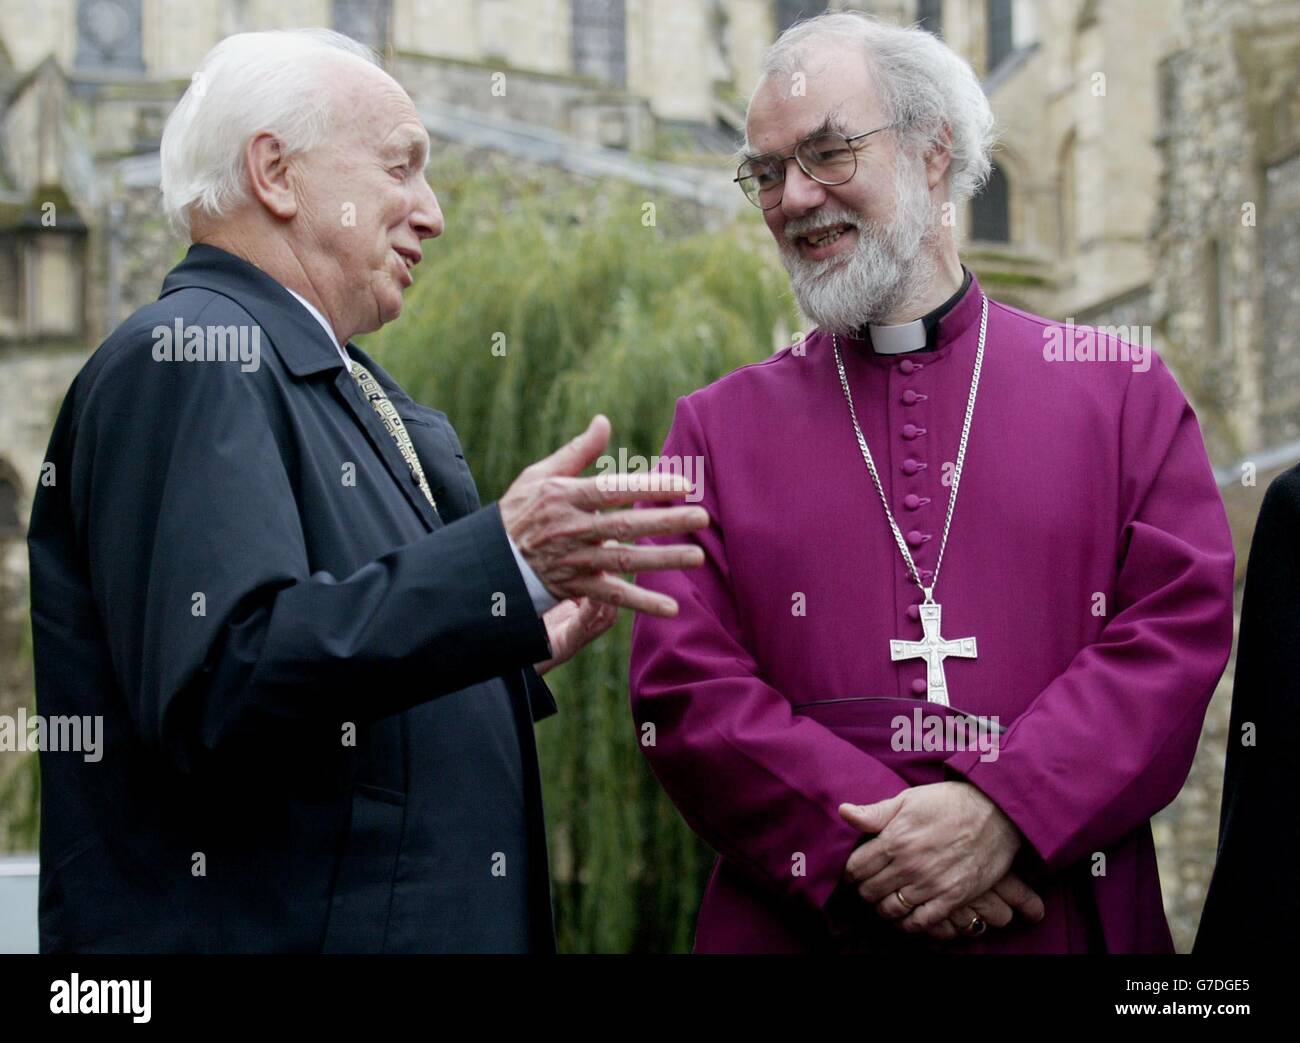 The President of Hungary, His Excellency Ferenc Madl (left) meets the Archbishop of Canterbury Dr Rowan Williams at Canterbury Cathedral, Kent, as part of the Canterbury festival celebrations. The President was visiting as part of the year long celebration of Hungarian Culture in the UK called 'Magyar Magic' - Hungary in focus 2004. Stock Photo